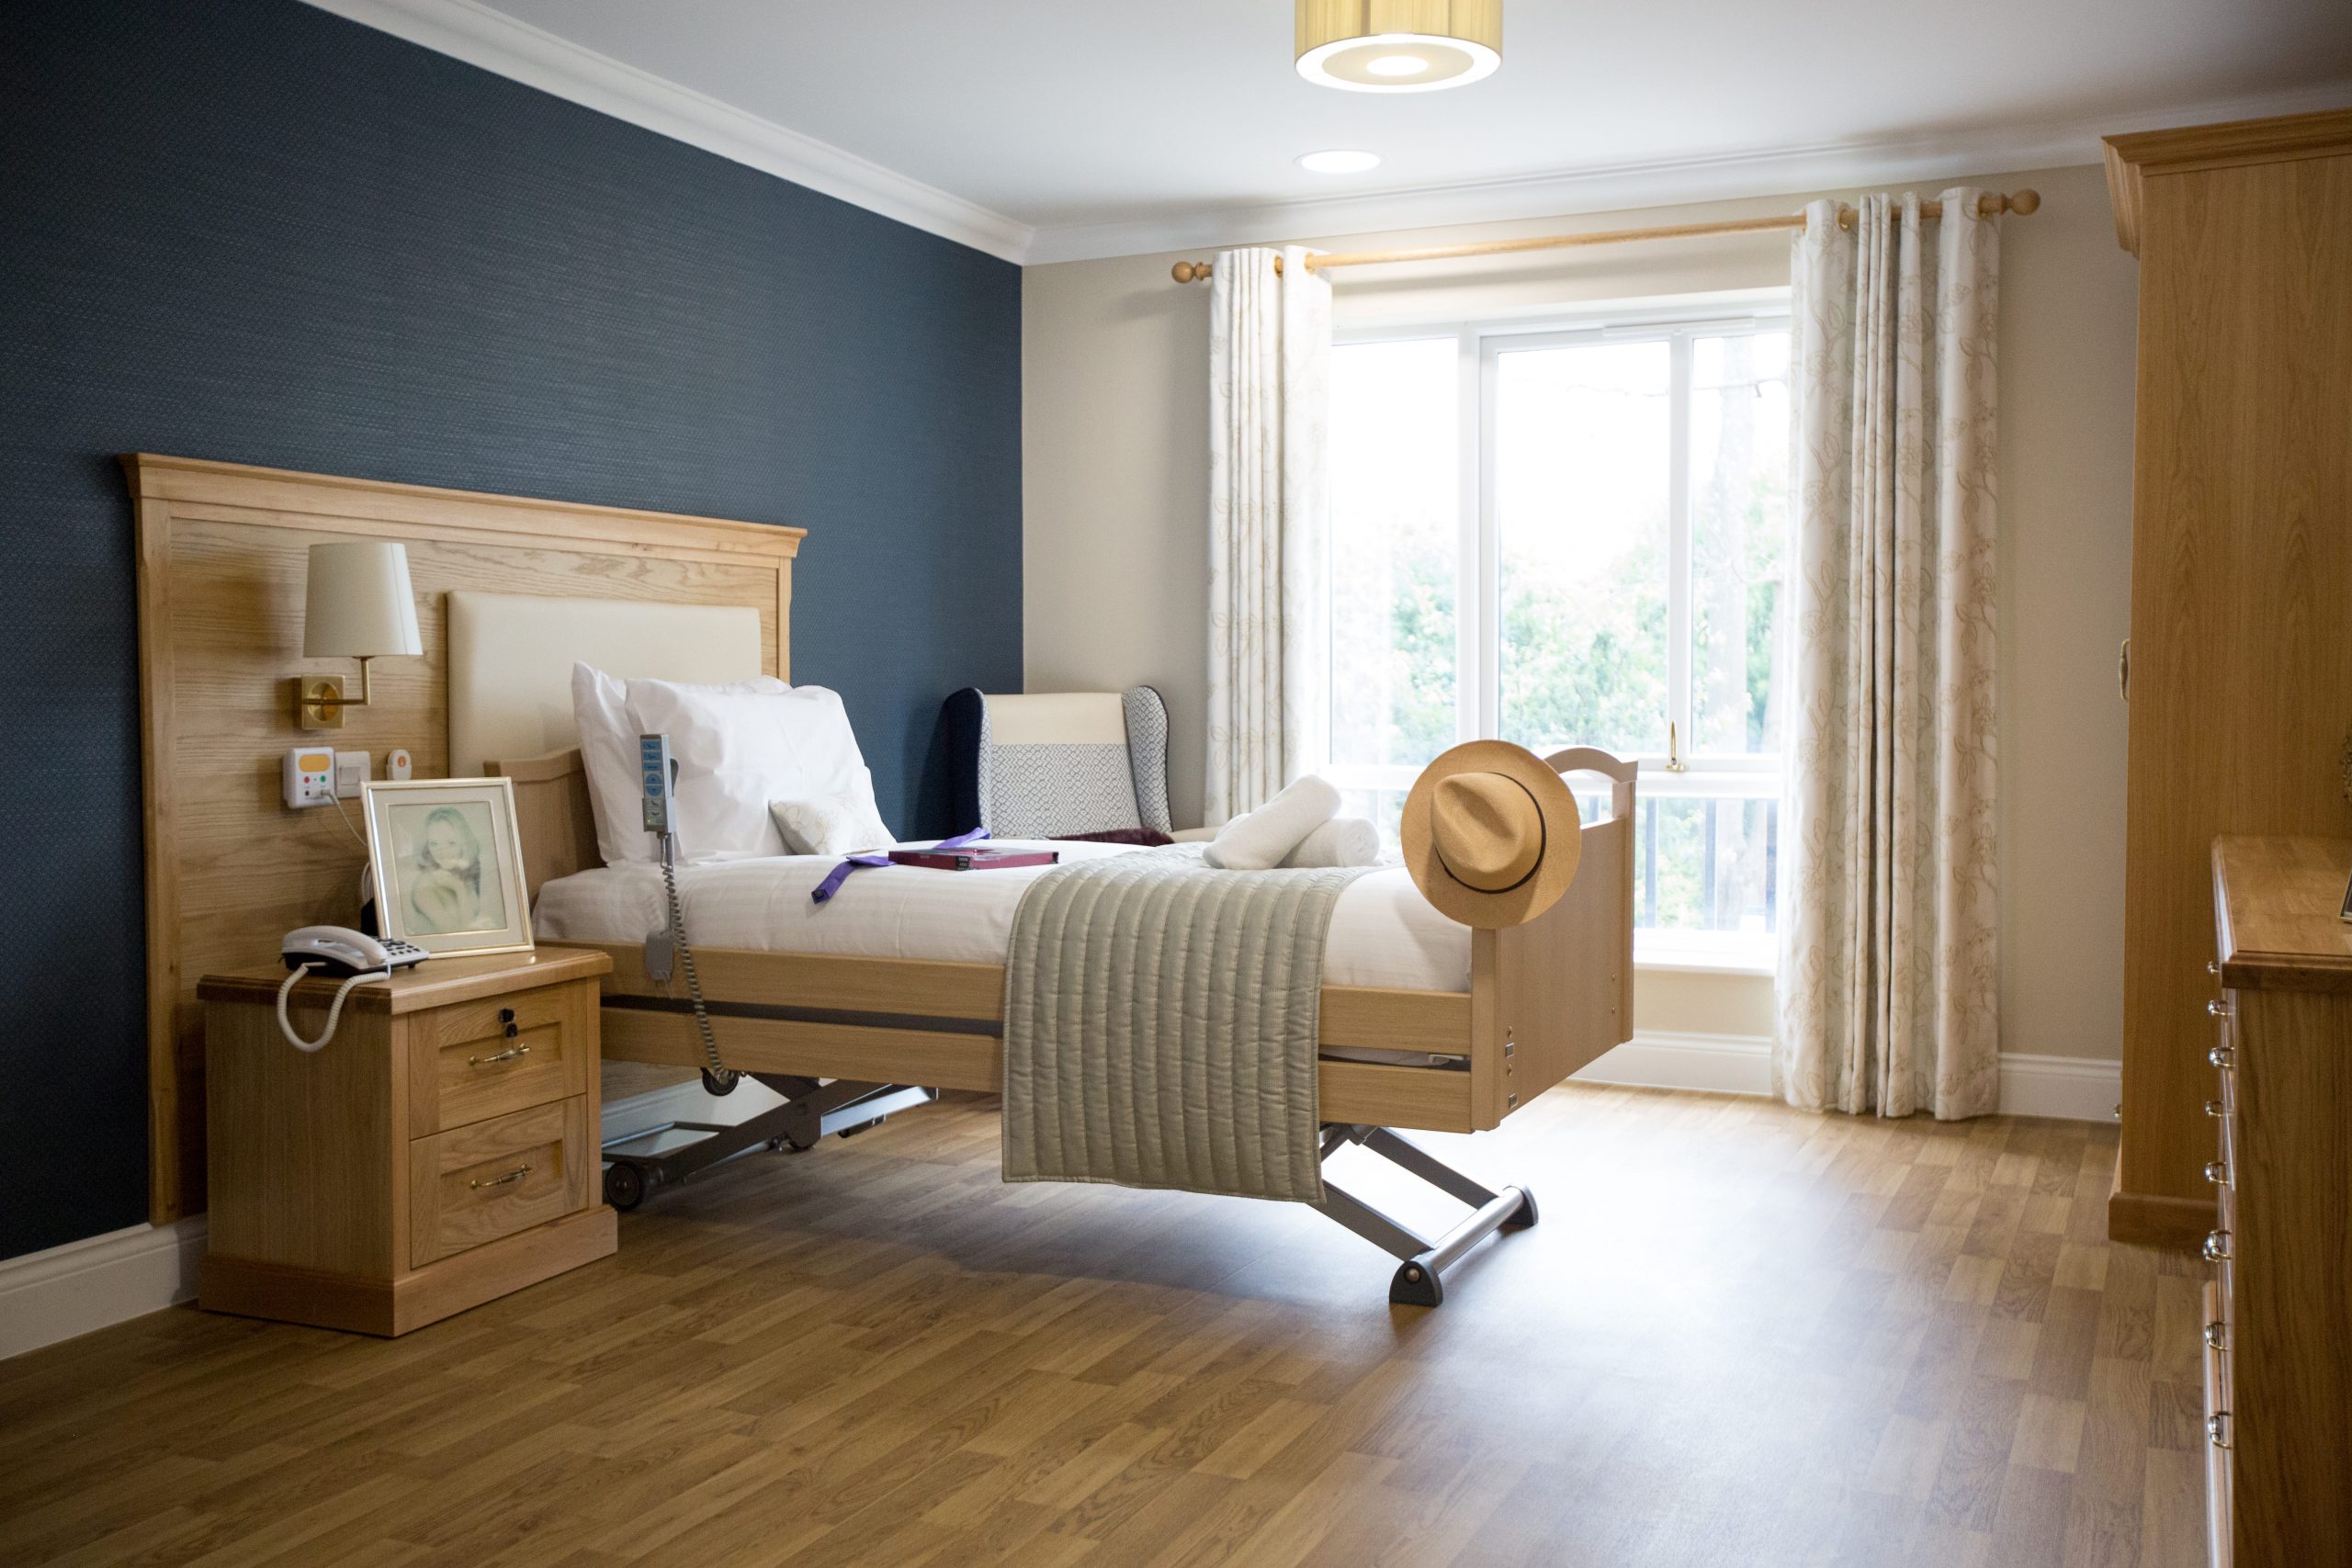 Northaw care home Cuffley Manor care